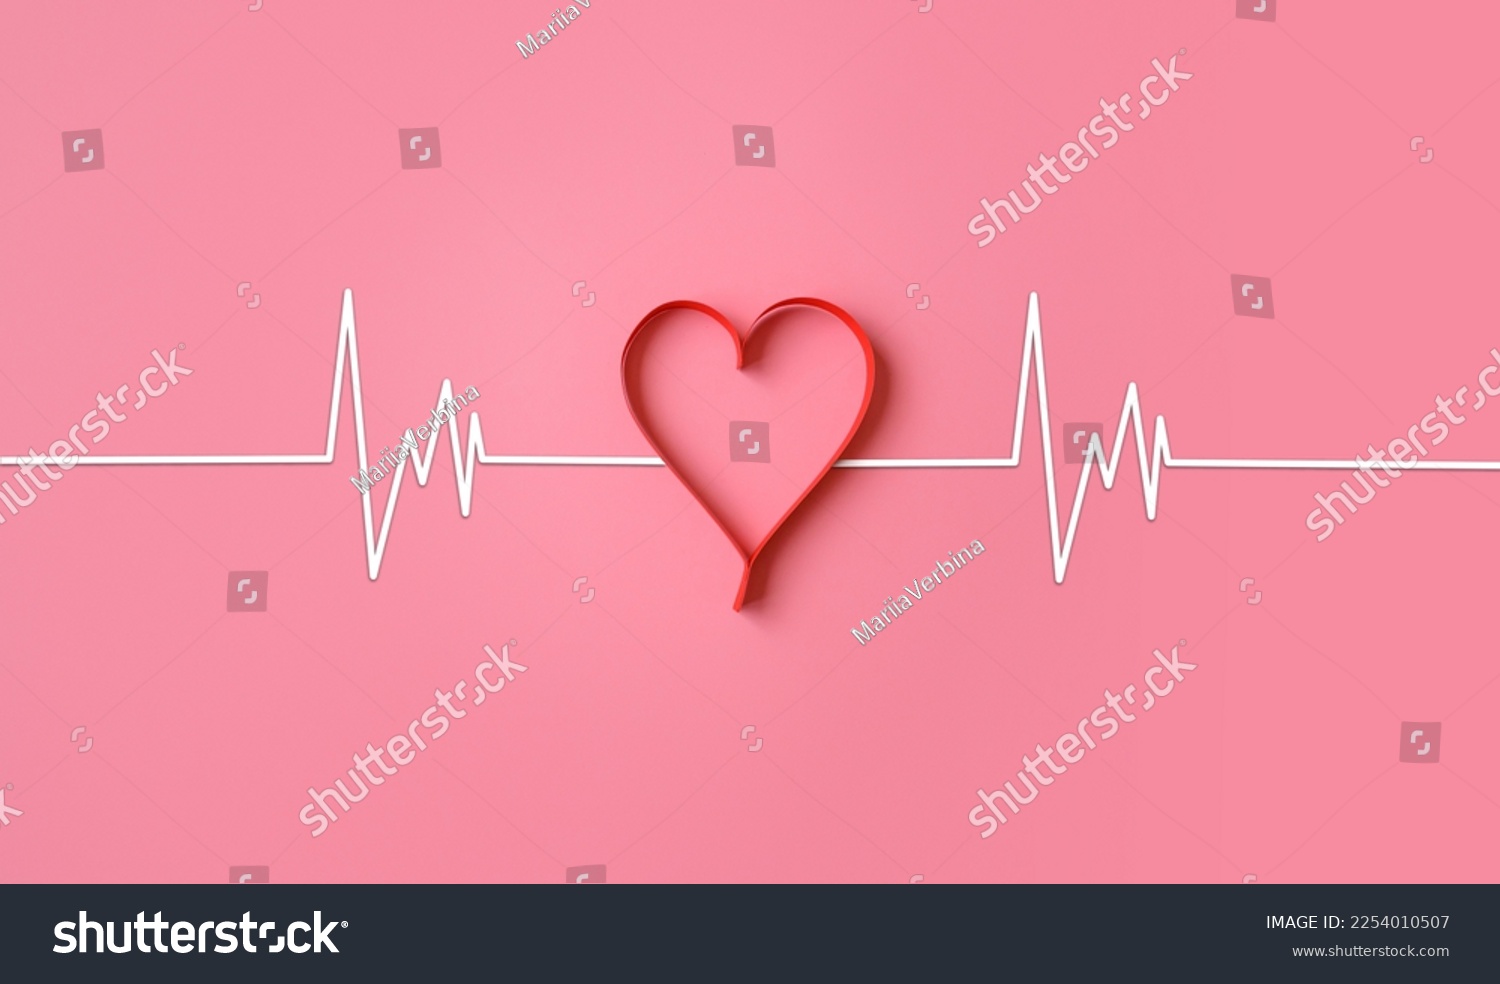 Heartbeat line with heart shape. Valentine's Day. Postcard with a declaration of love. Valentine postcard. Red hearts with strings. Place for text #2254010507